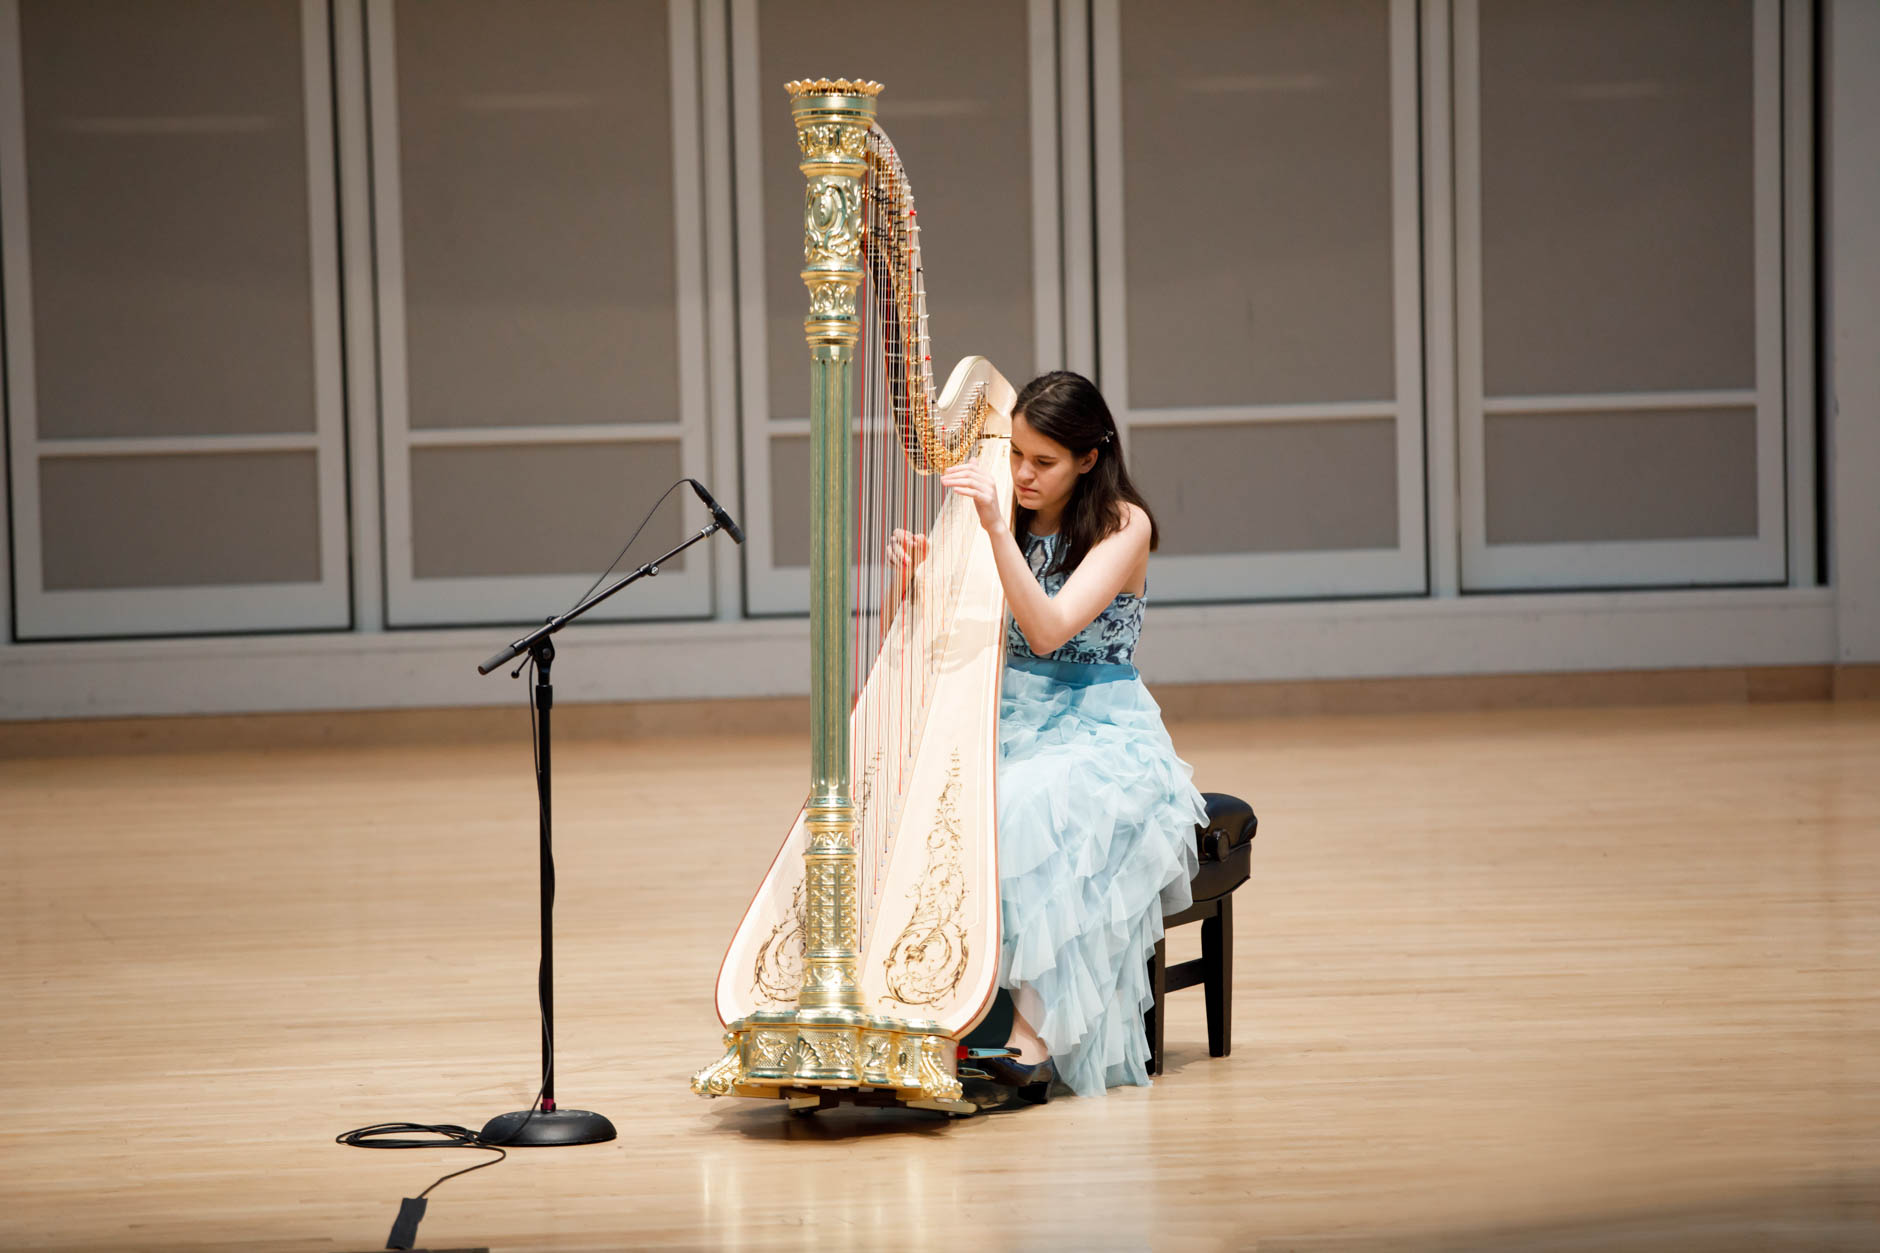 Harpist Lenka Petrovic performs during her laureate recital at the 11th USA International Harp Competition at Indiana University in Bloomington, Indiana on Sunday, July 7, 2019. (Photo by James Brosher)